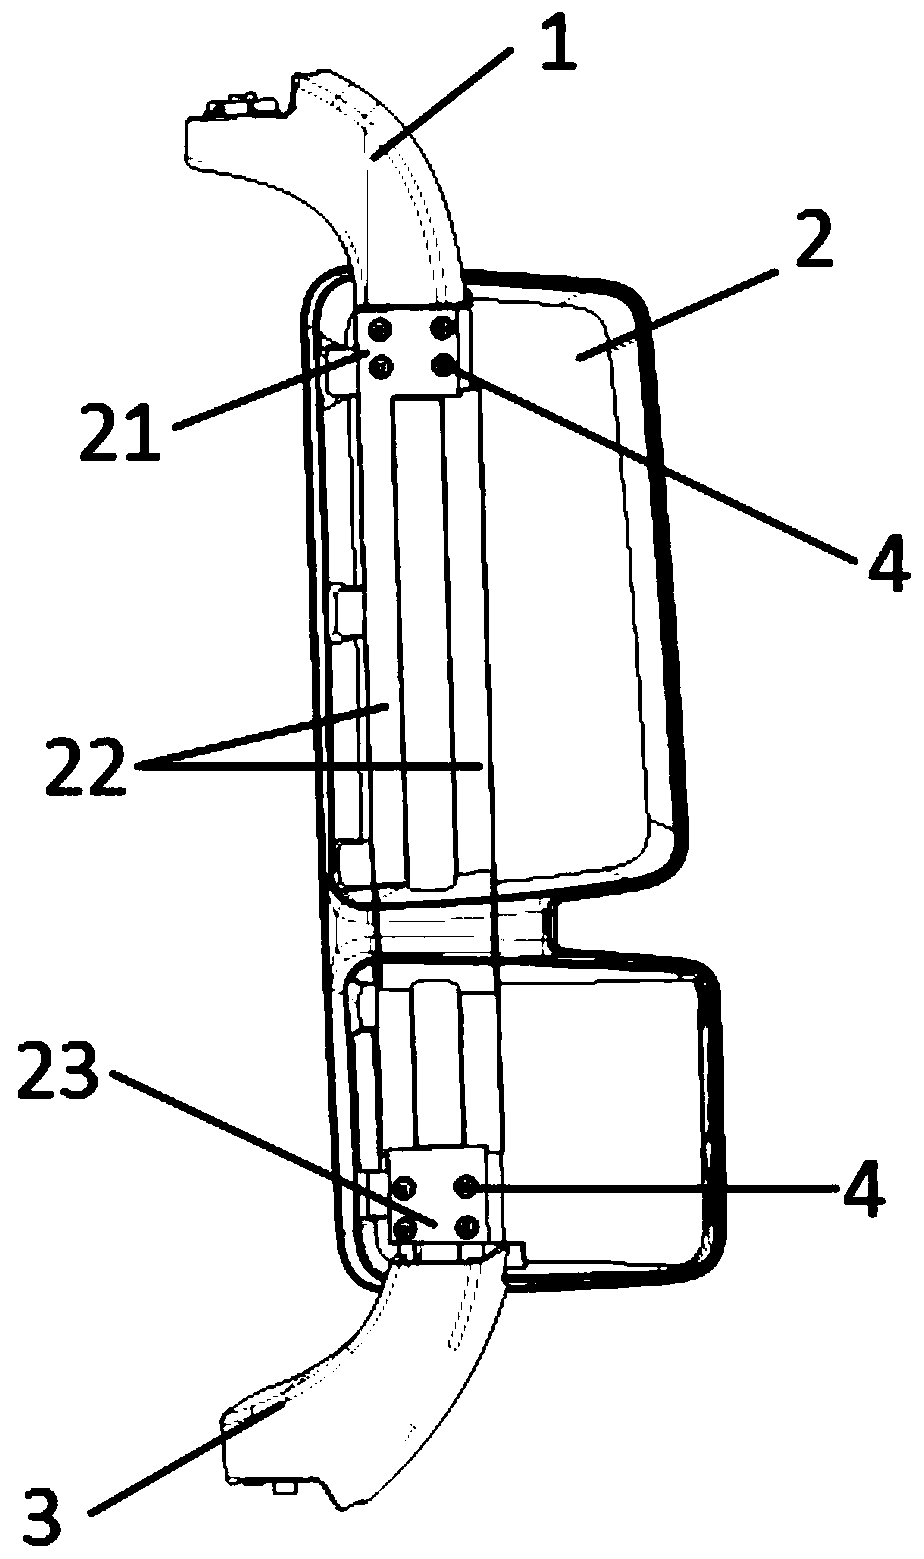 Load-supporting mirror shell structure of automobile mirror